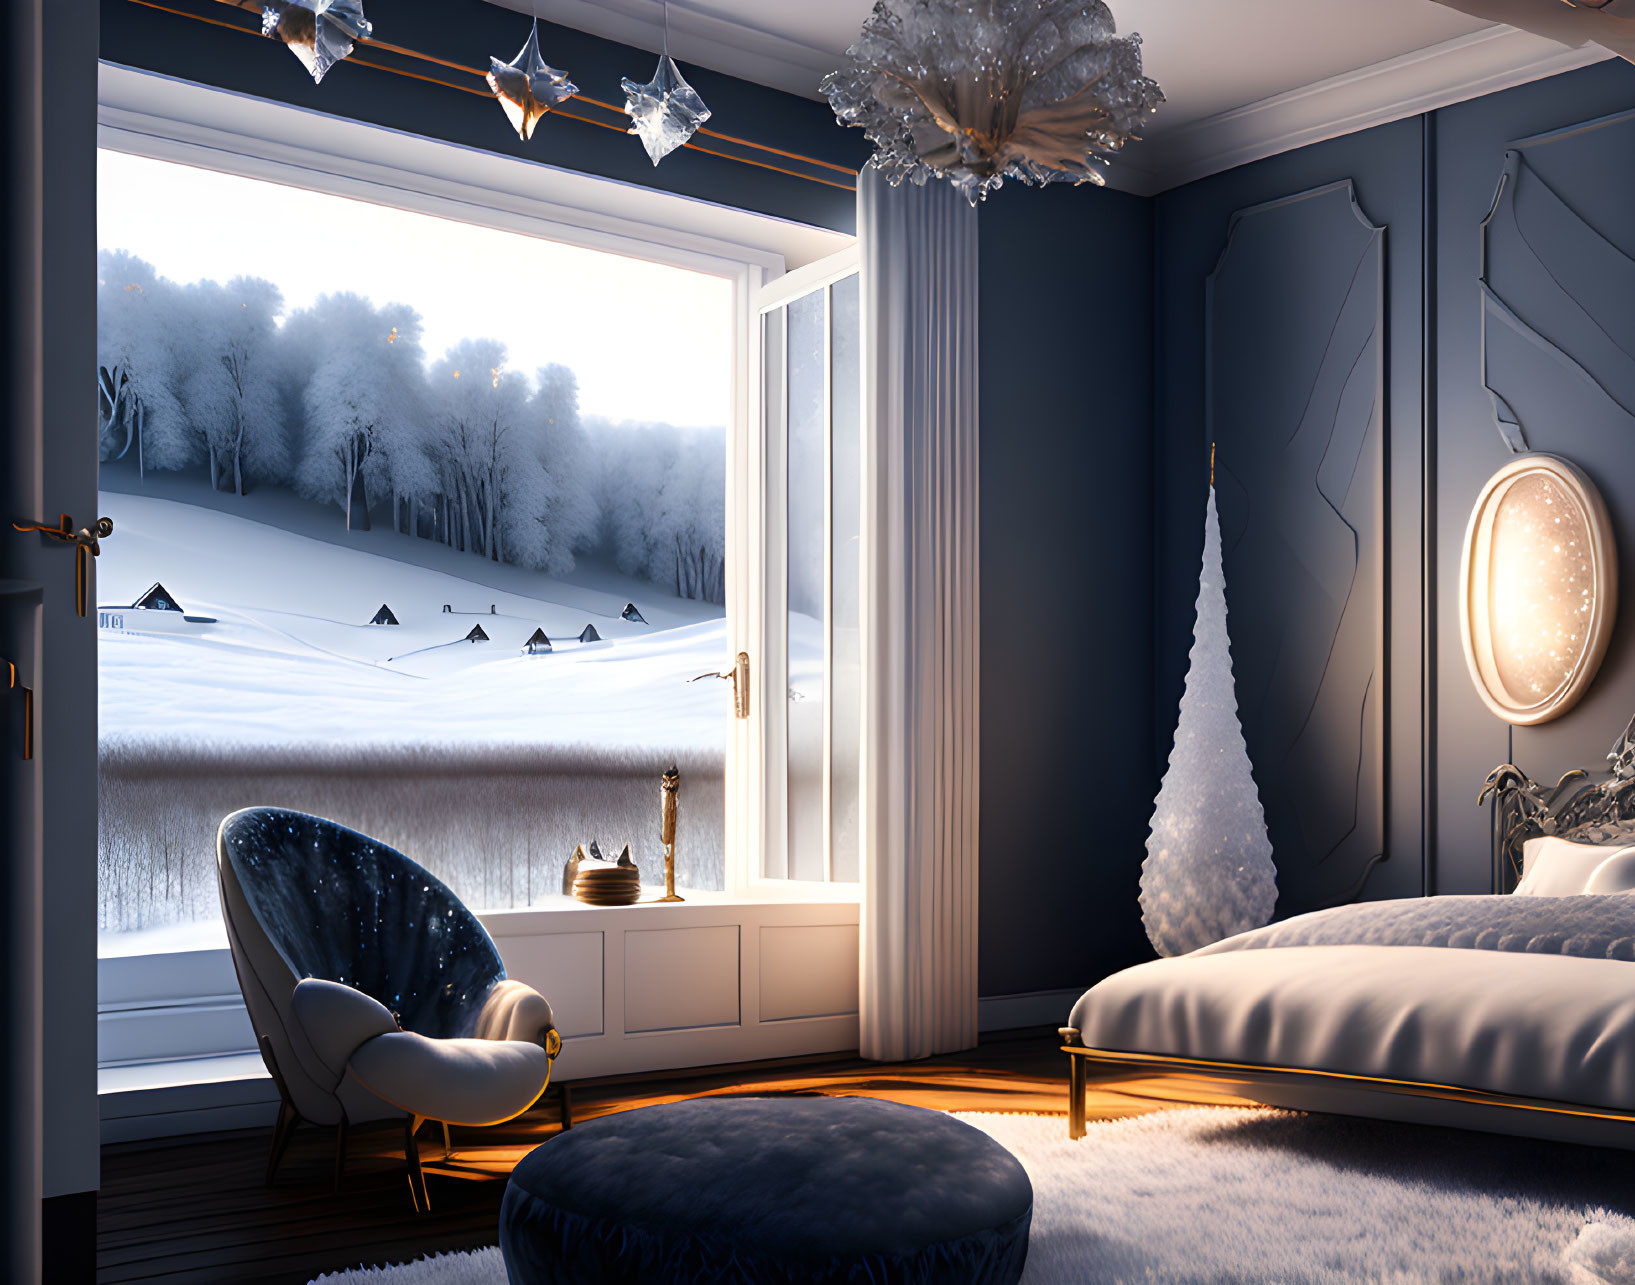 Winter-themed room with snowy view, elegant furniture, Christmas decor